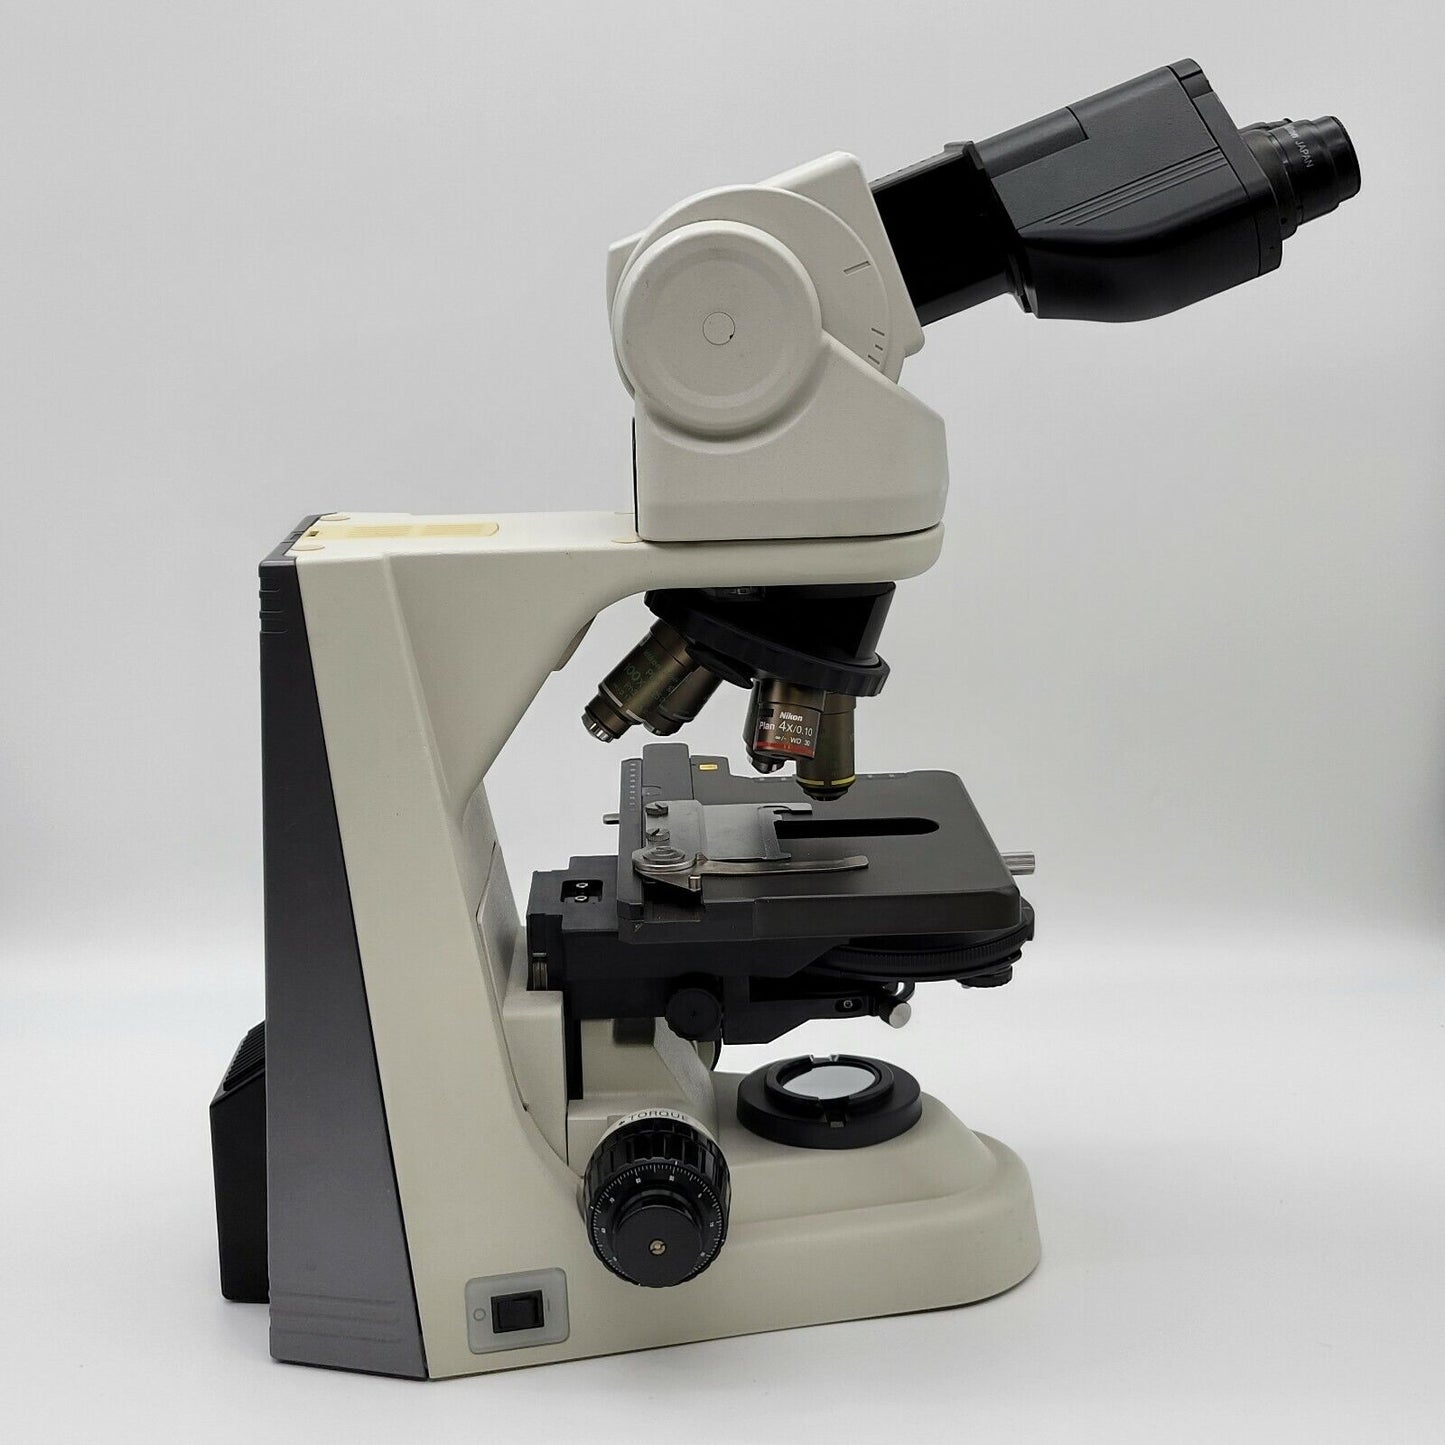 Nikon Microscope Eclipse 50i with Phase Contrast and Tilting Ergo Head - microscopemarketplace